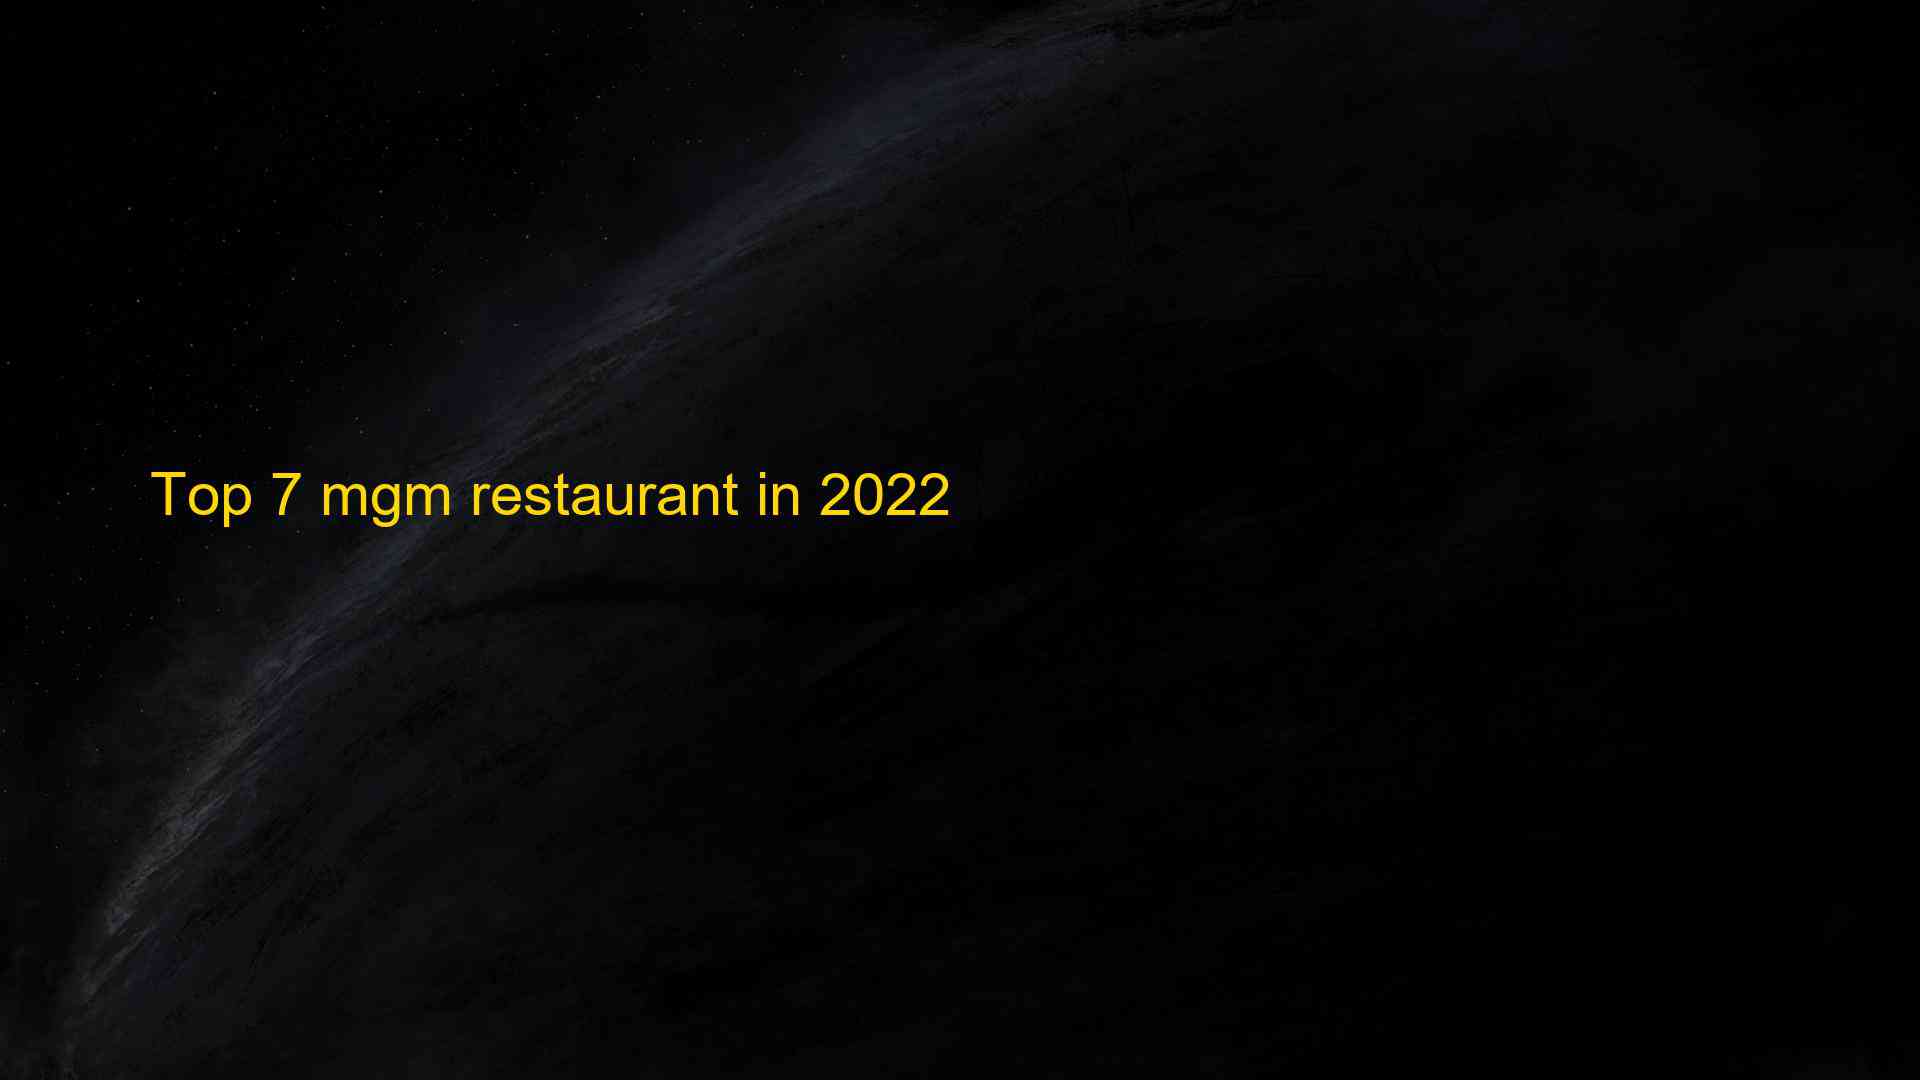 Top 7 mgm restaurant in 2022 1663390493